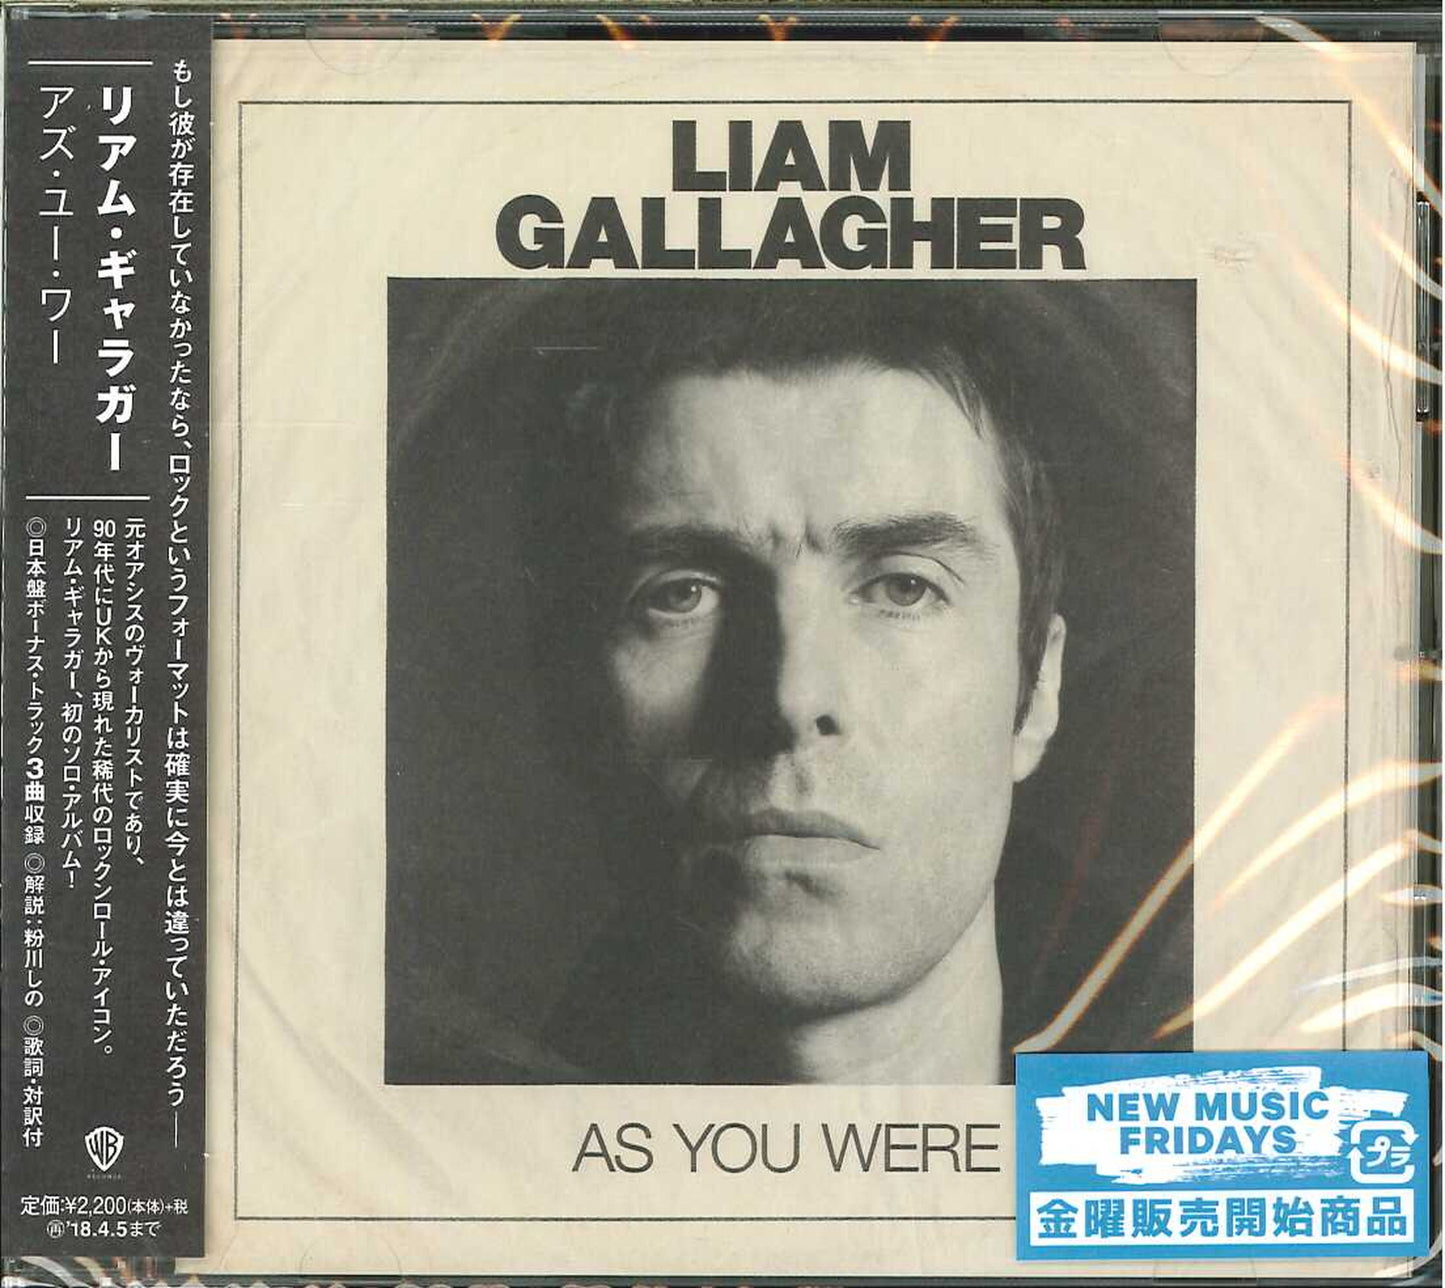 Liam Gallagher - As You Were - Japan CD